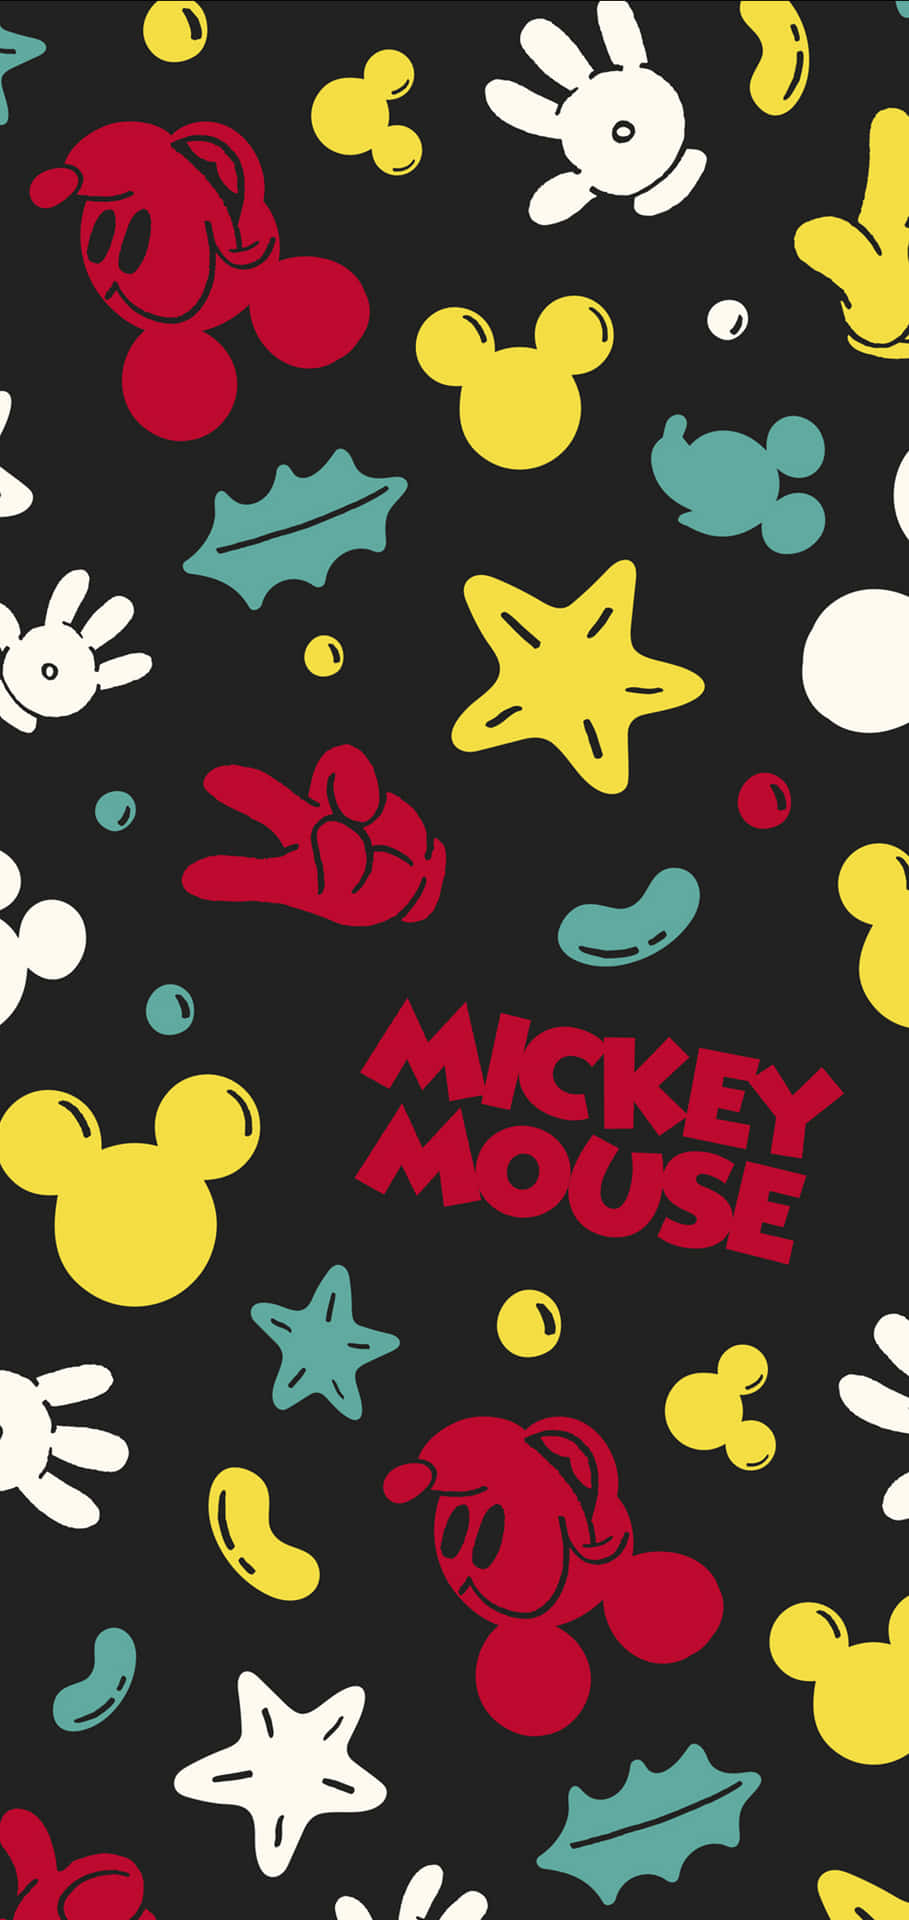 Fun and Whimsical Mickey Mouse Home Wallpaper